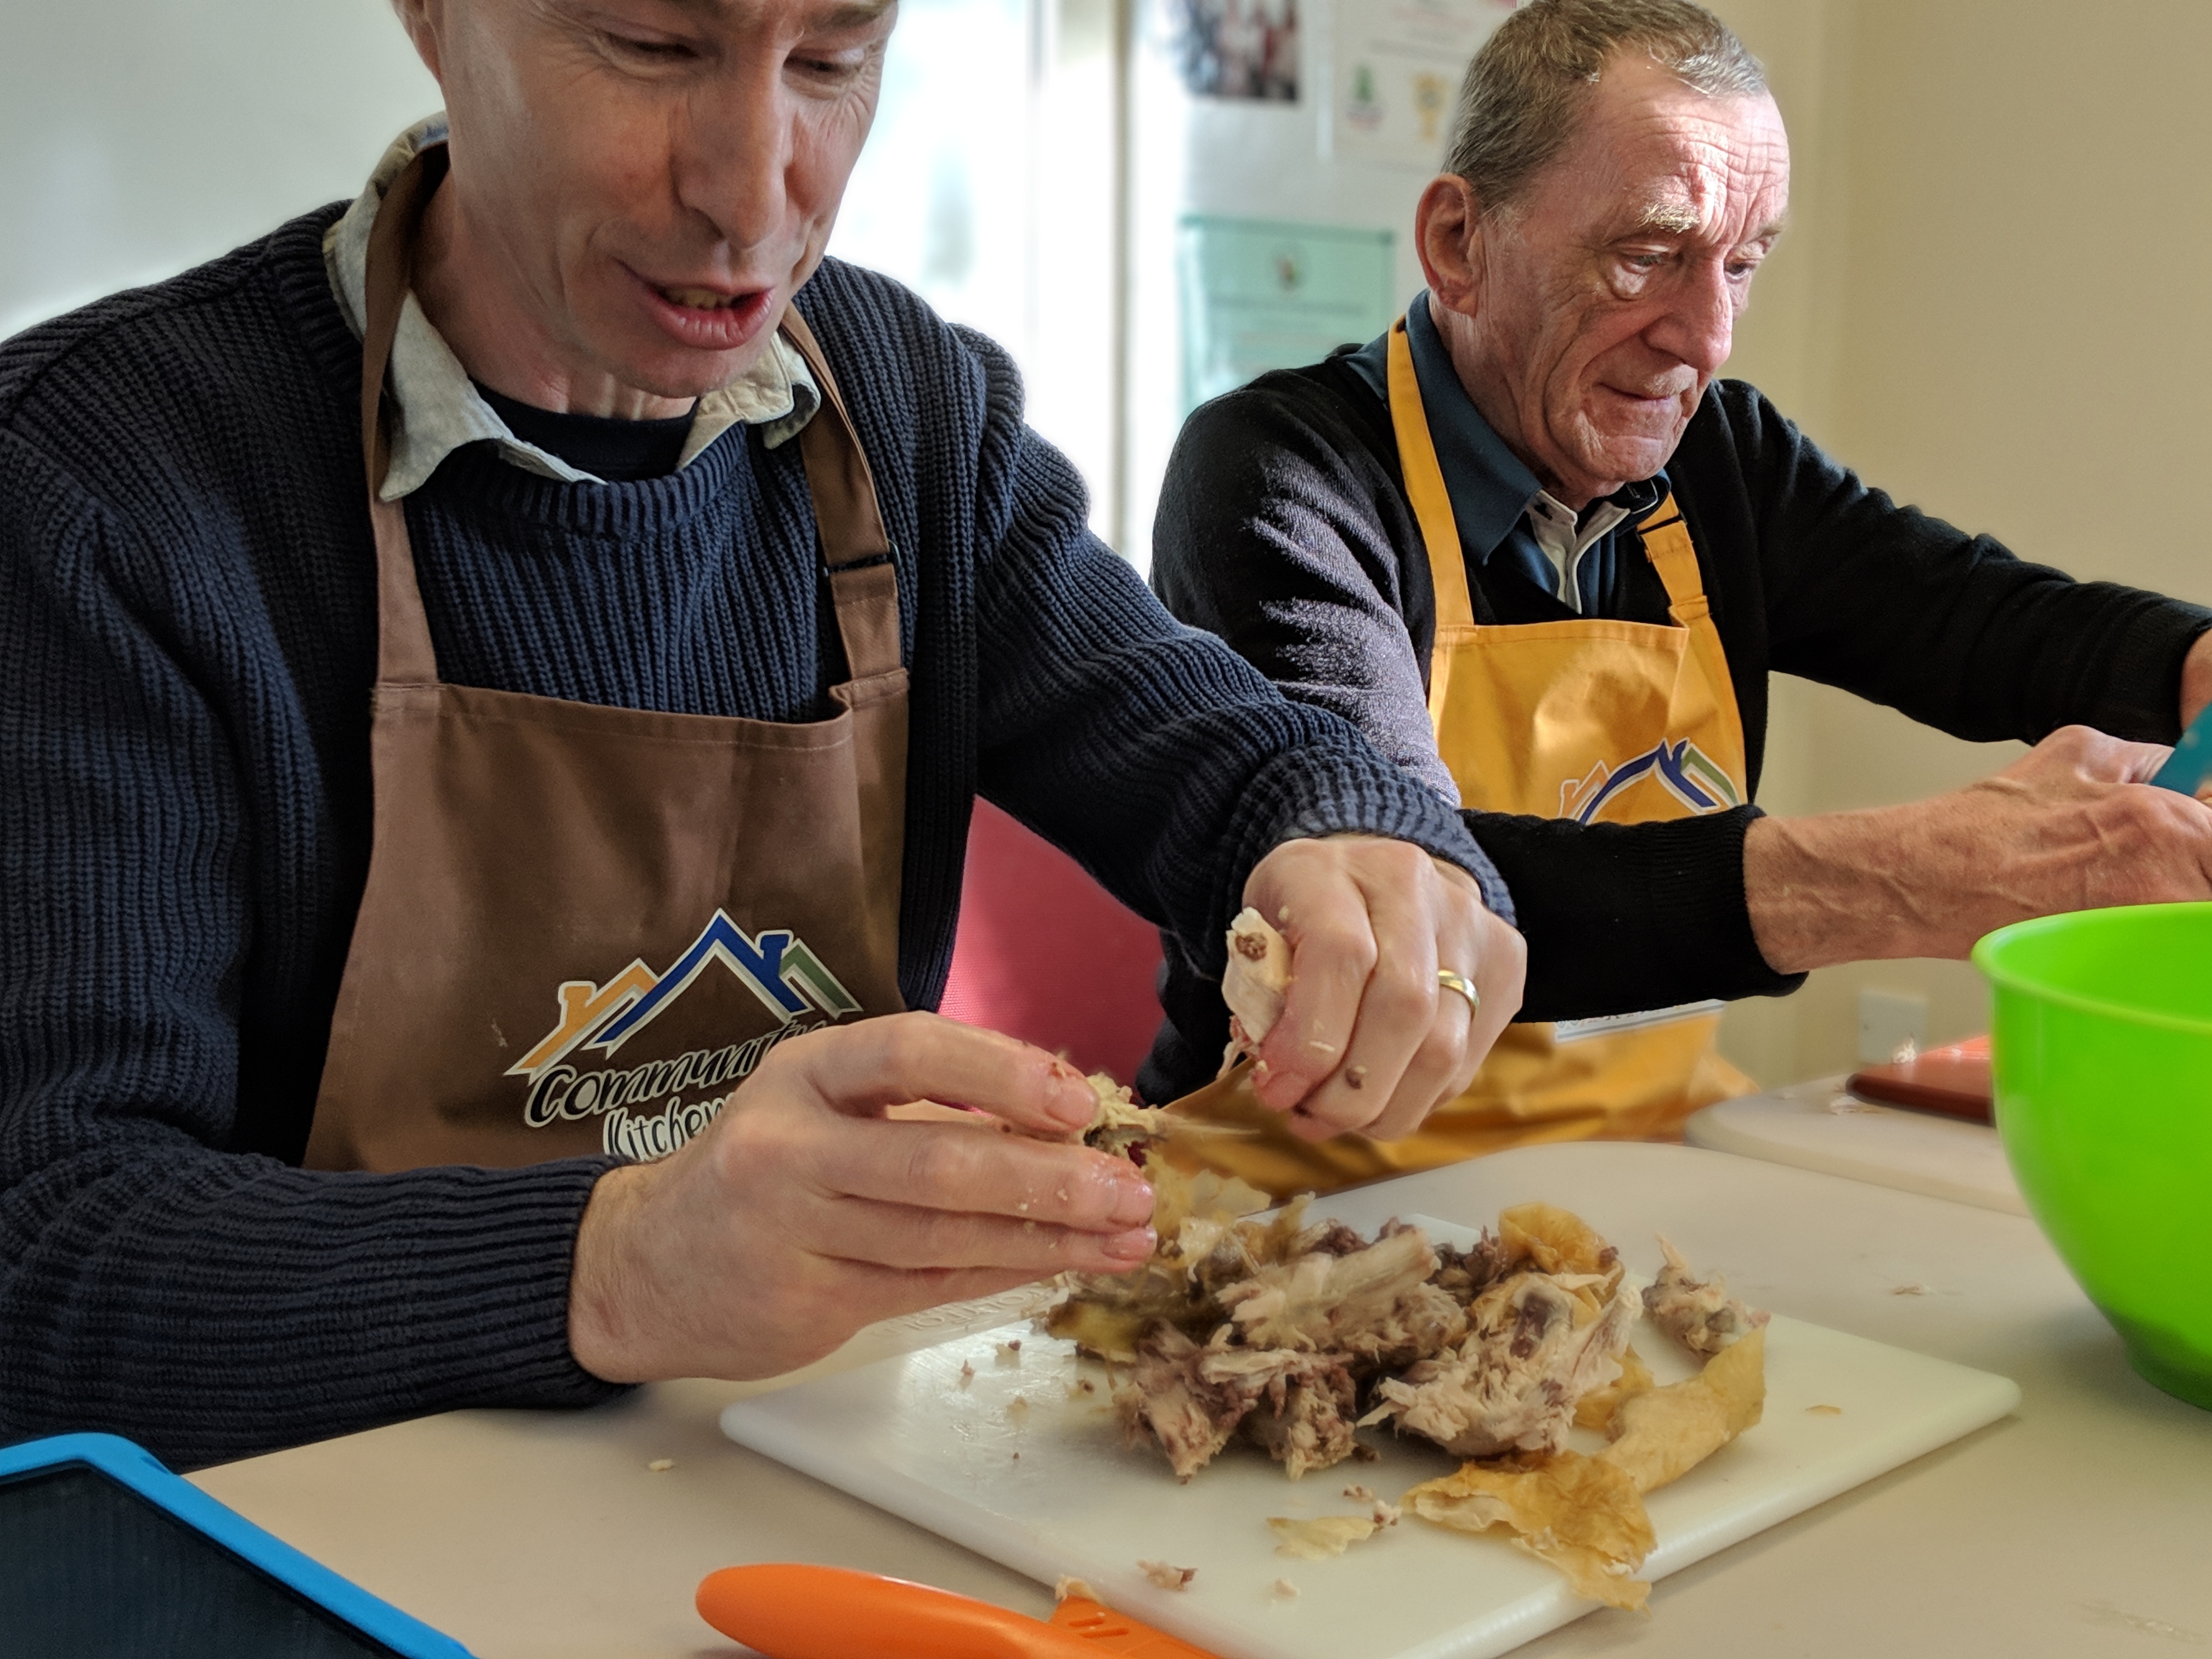 Coalville community kitchen - FREE Cooking class